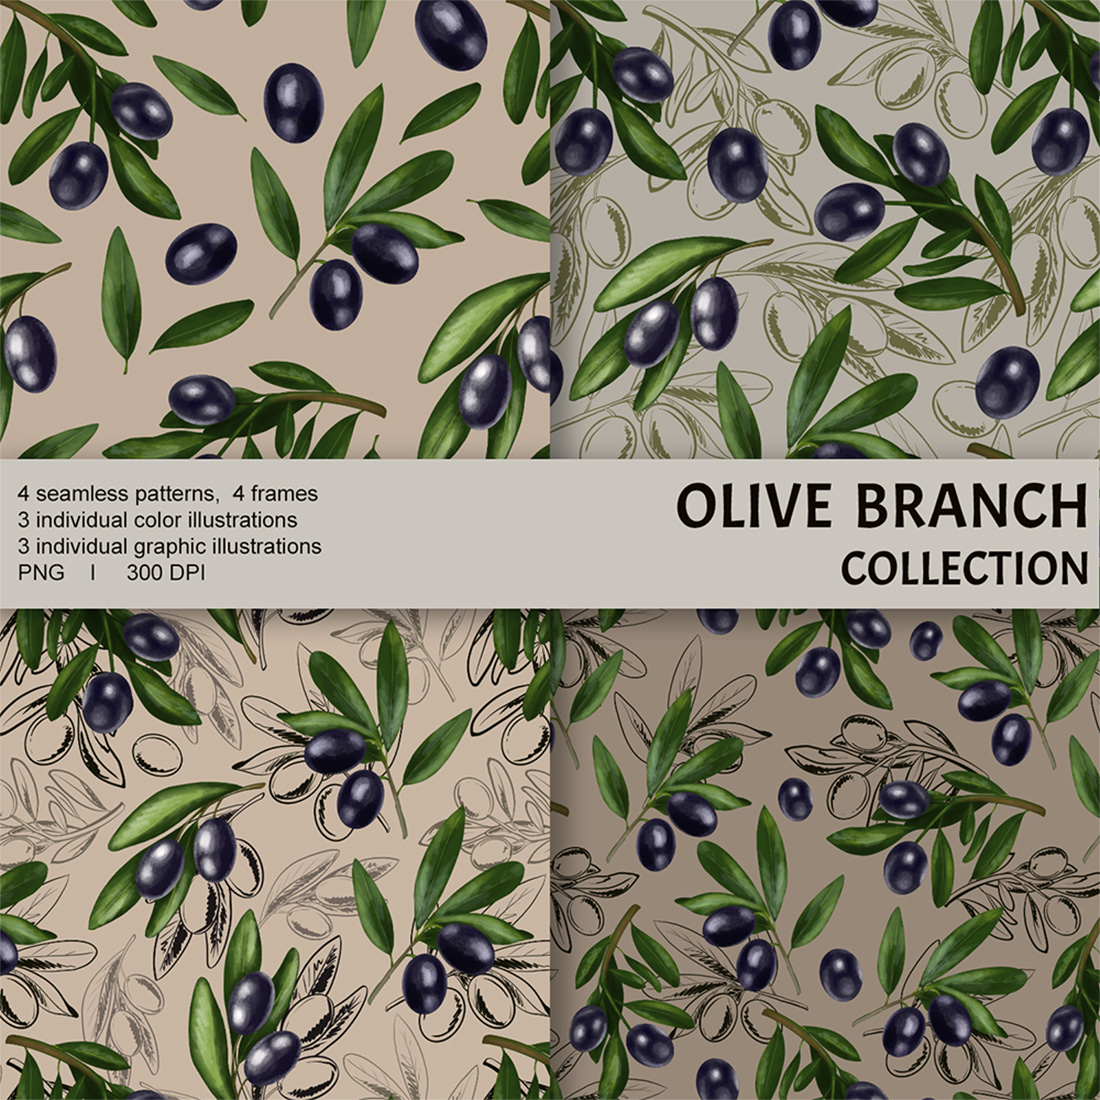 Olive branch collection cover image.